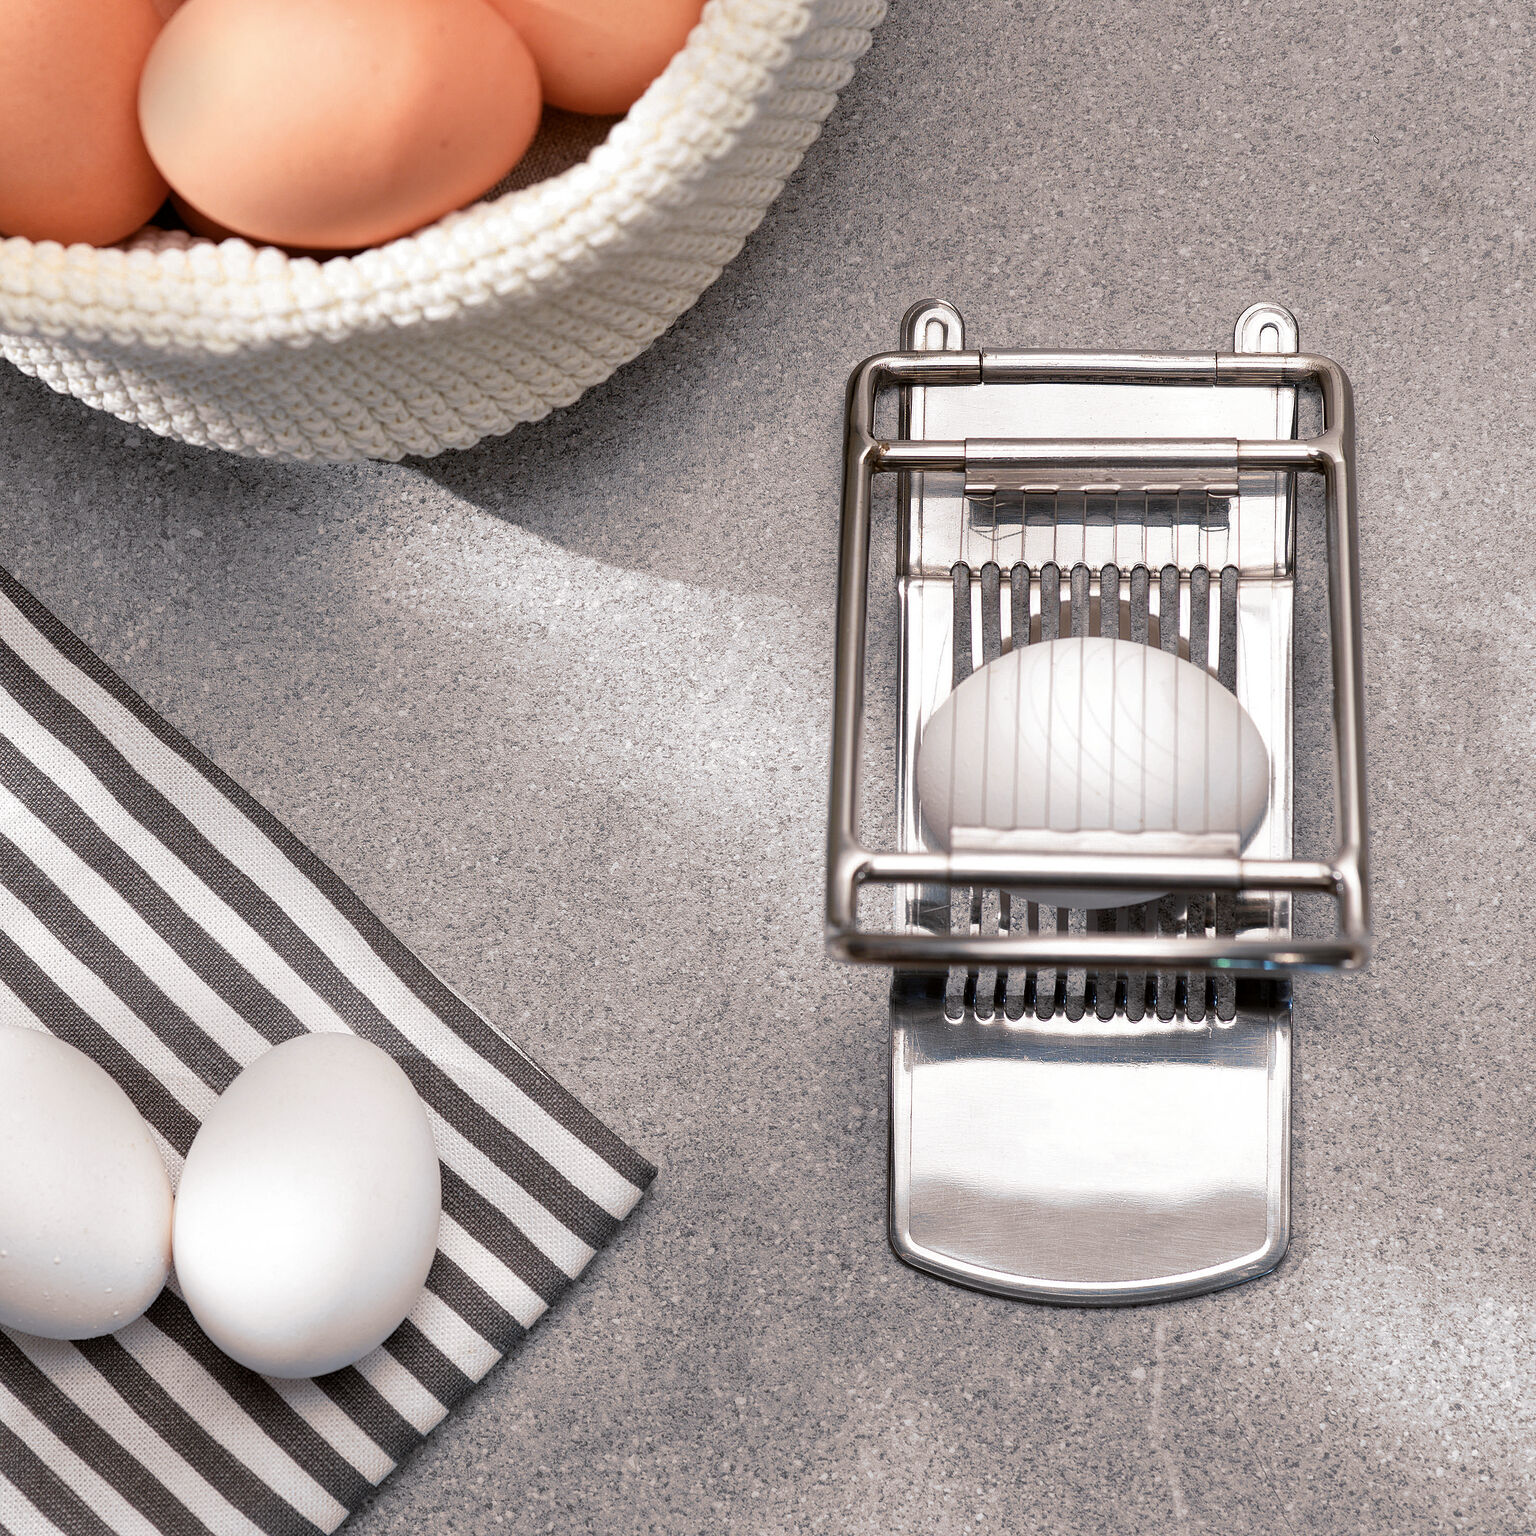 kiwi etc 7.753.46 inch 1 Egg Slicer with Stainless Steel Wires,Two Cutting Methods,PP resin material,19.78.8cm Rose red for Egg strawberry 